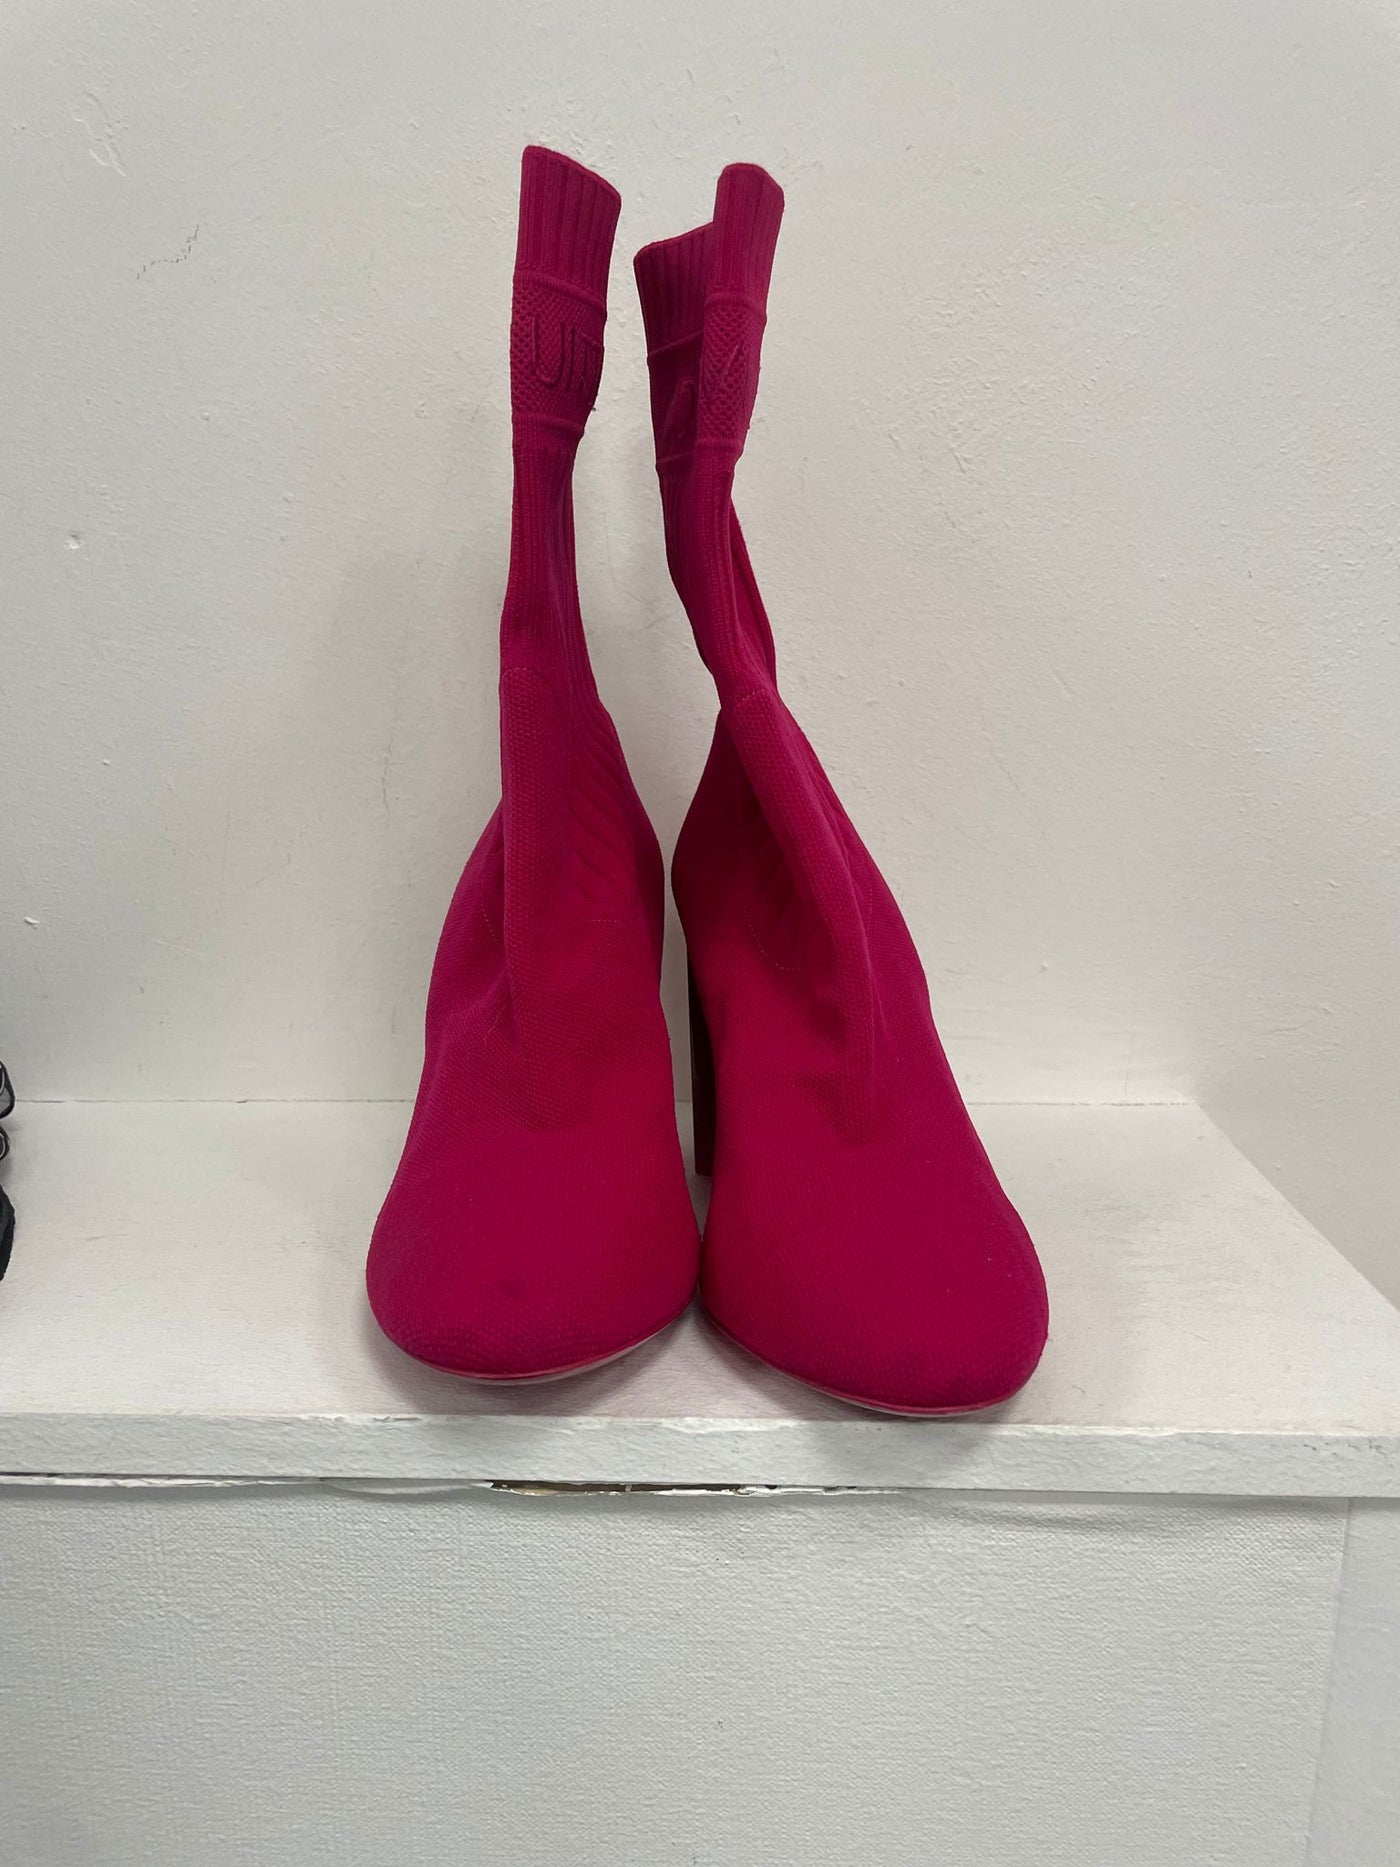 Louis Vuitton silhouette cloth pink boots size 40